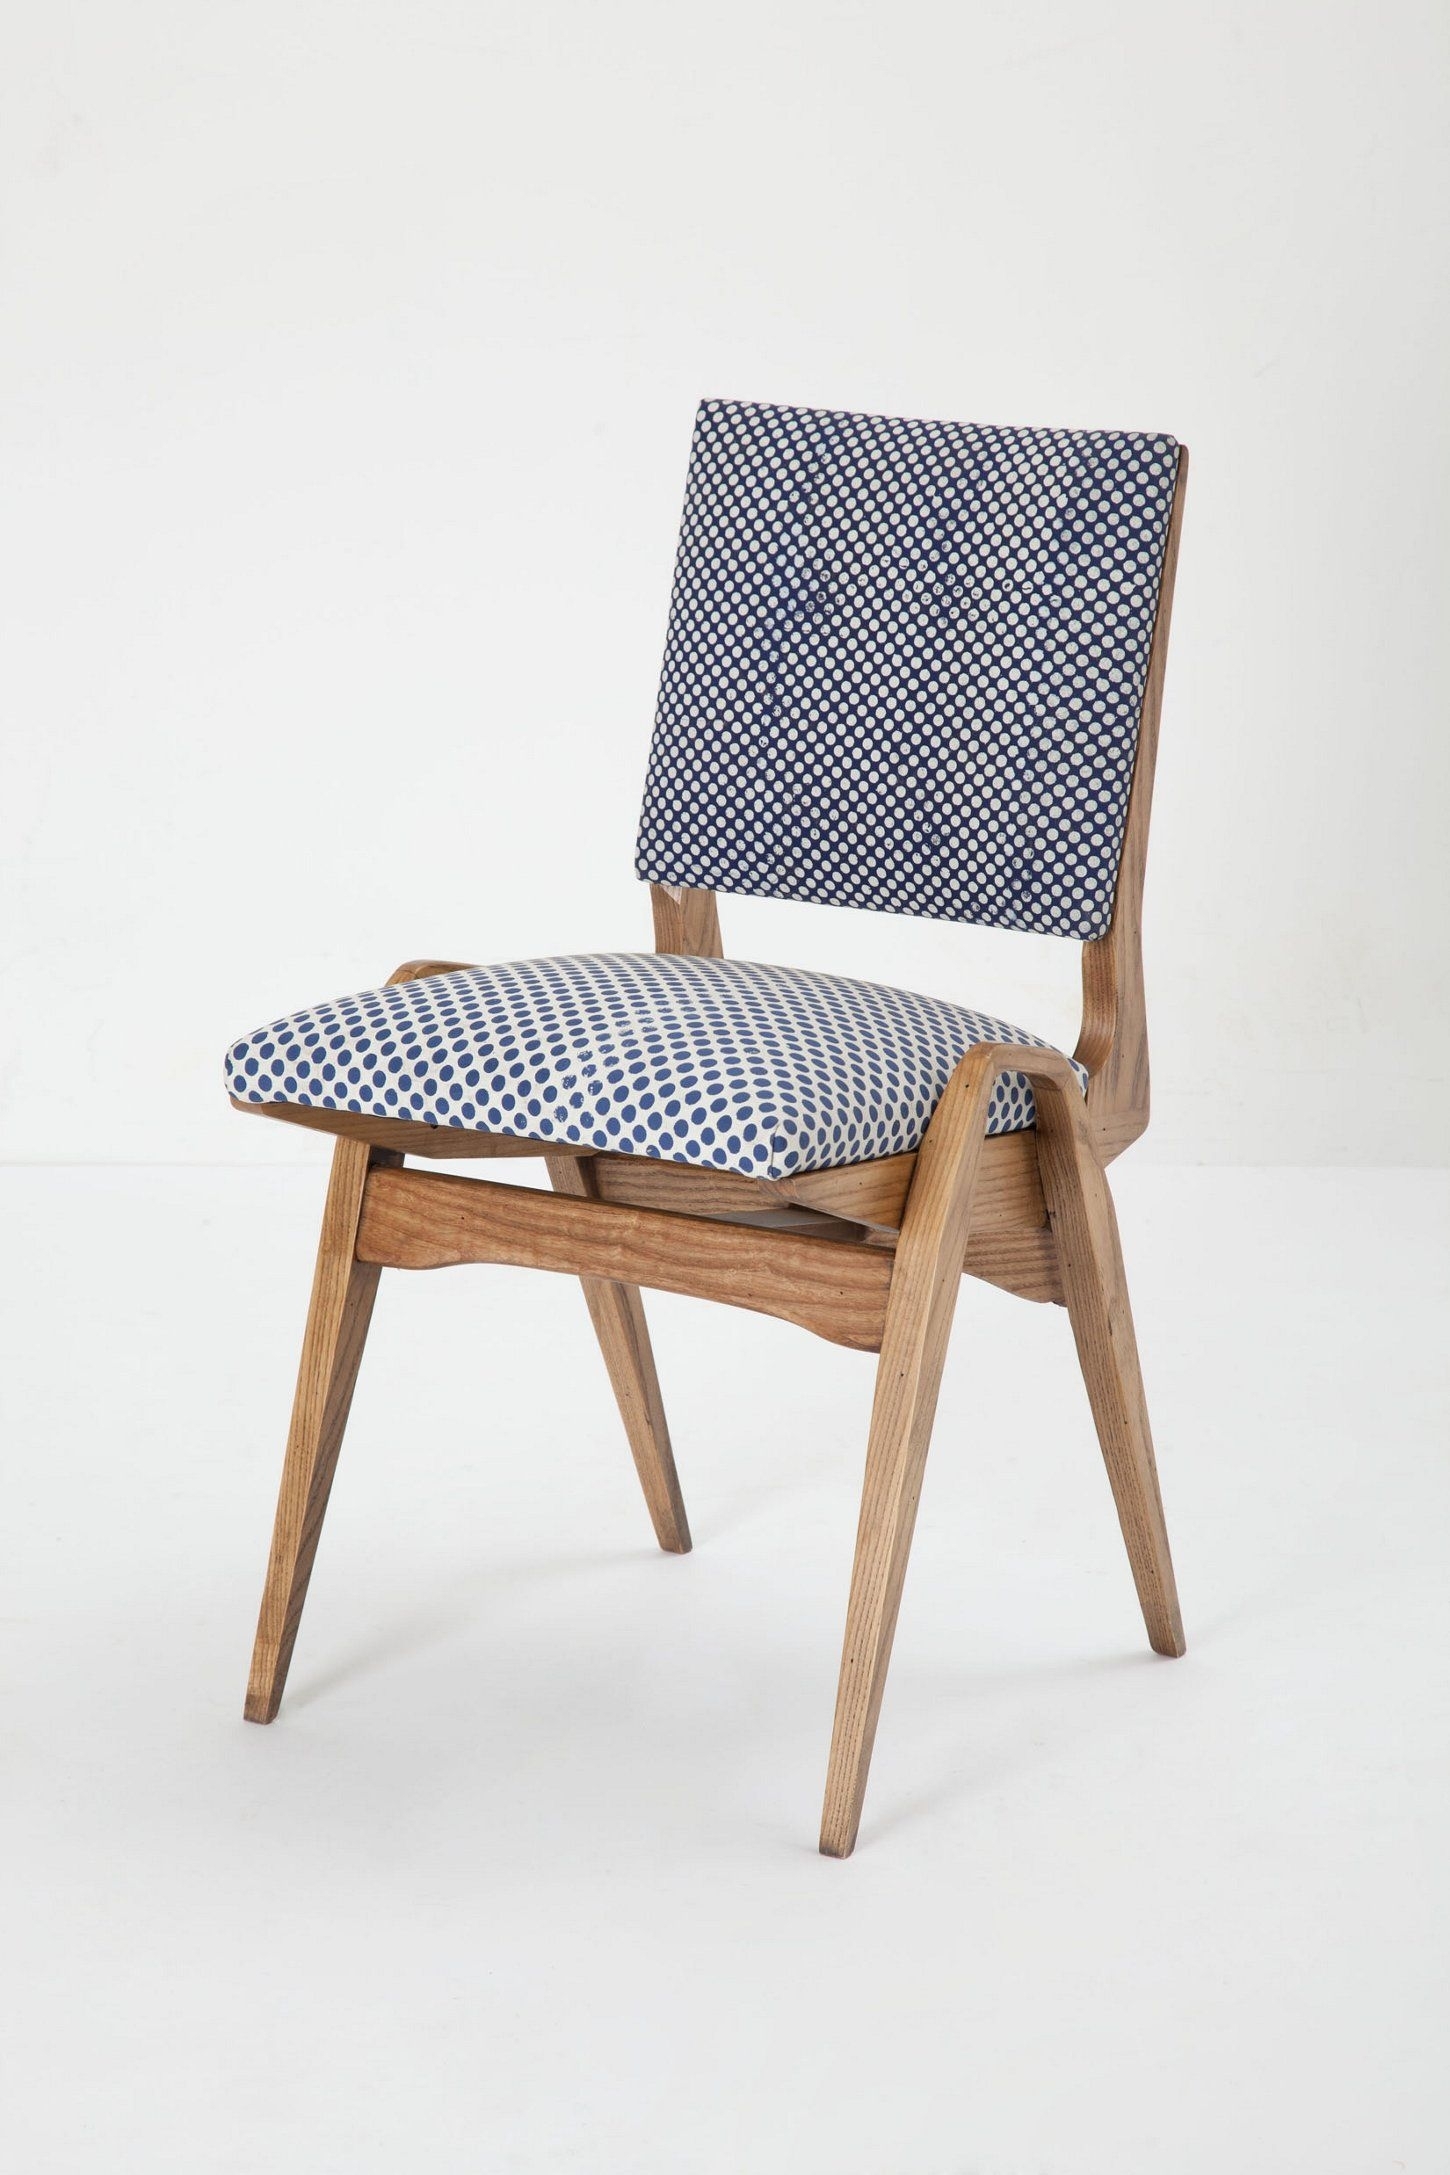 Upholstered Folding Chairs 